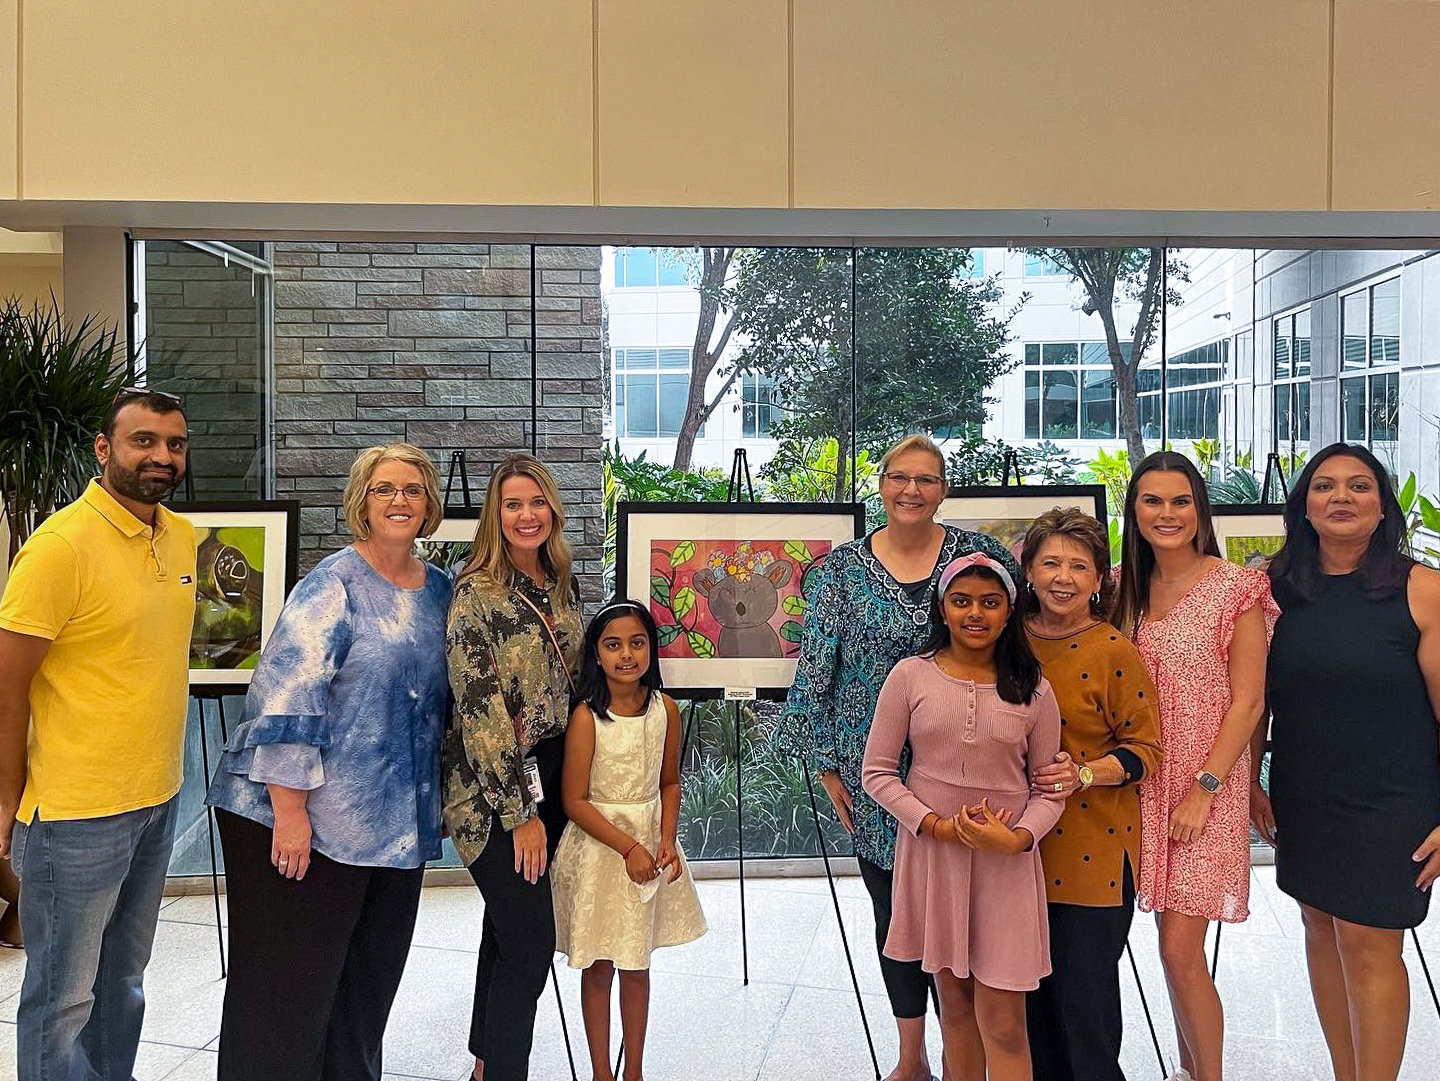 Katy ISD student patients, visitors, and staff at Memorial Hermann Katy Hospital, 23900 Katy Fwy., can now enjoy artwork by some Katy ISD student artists.